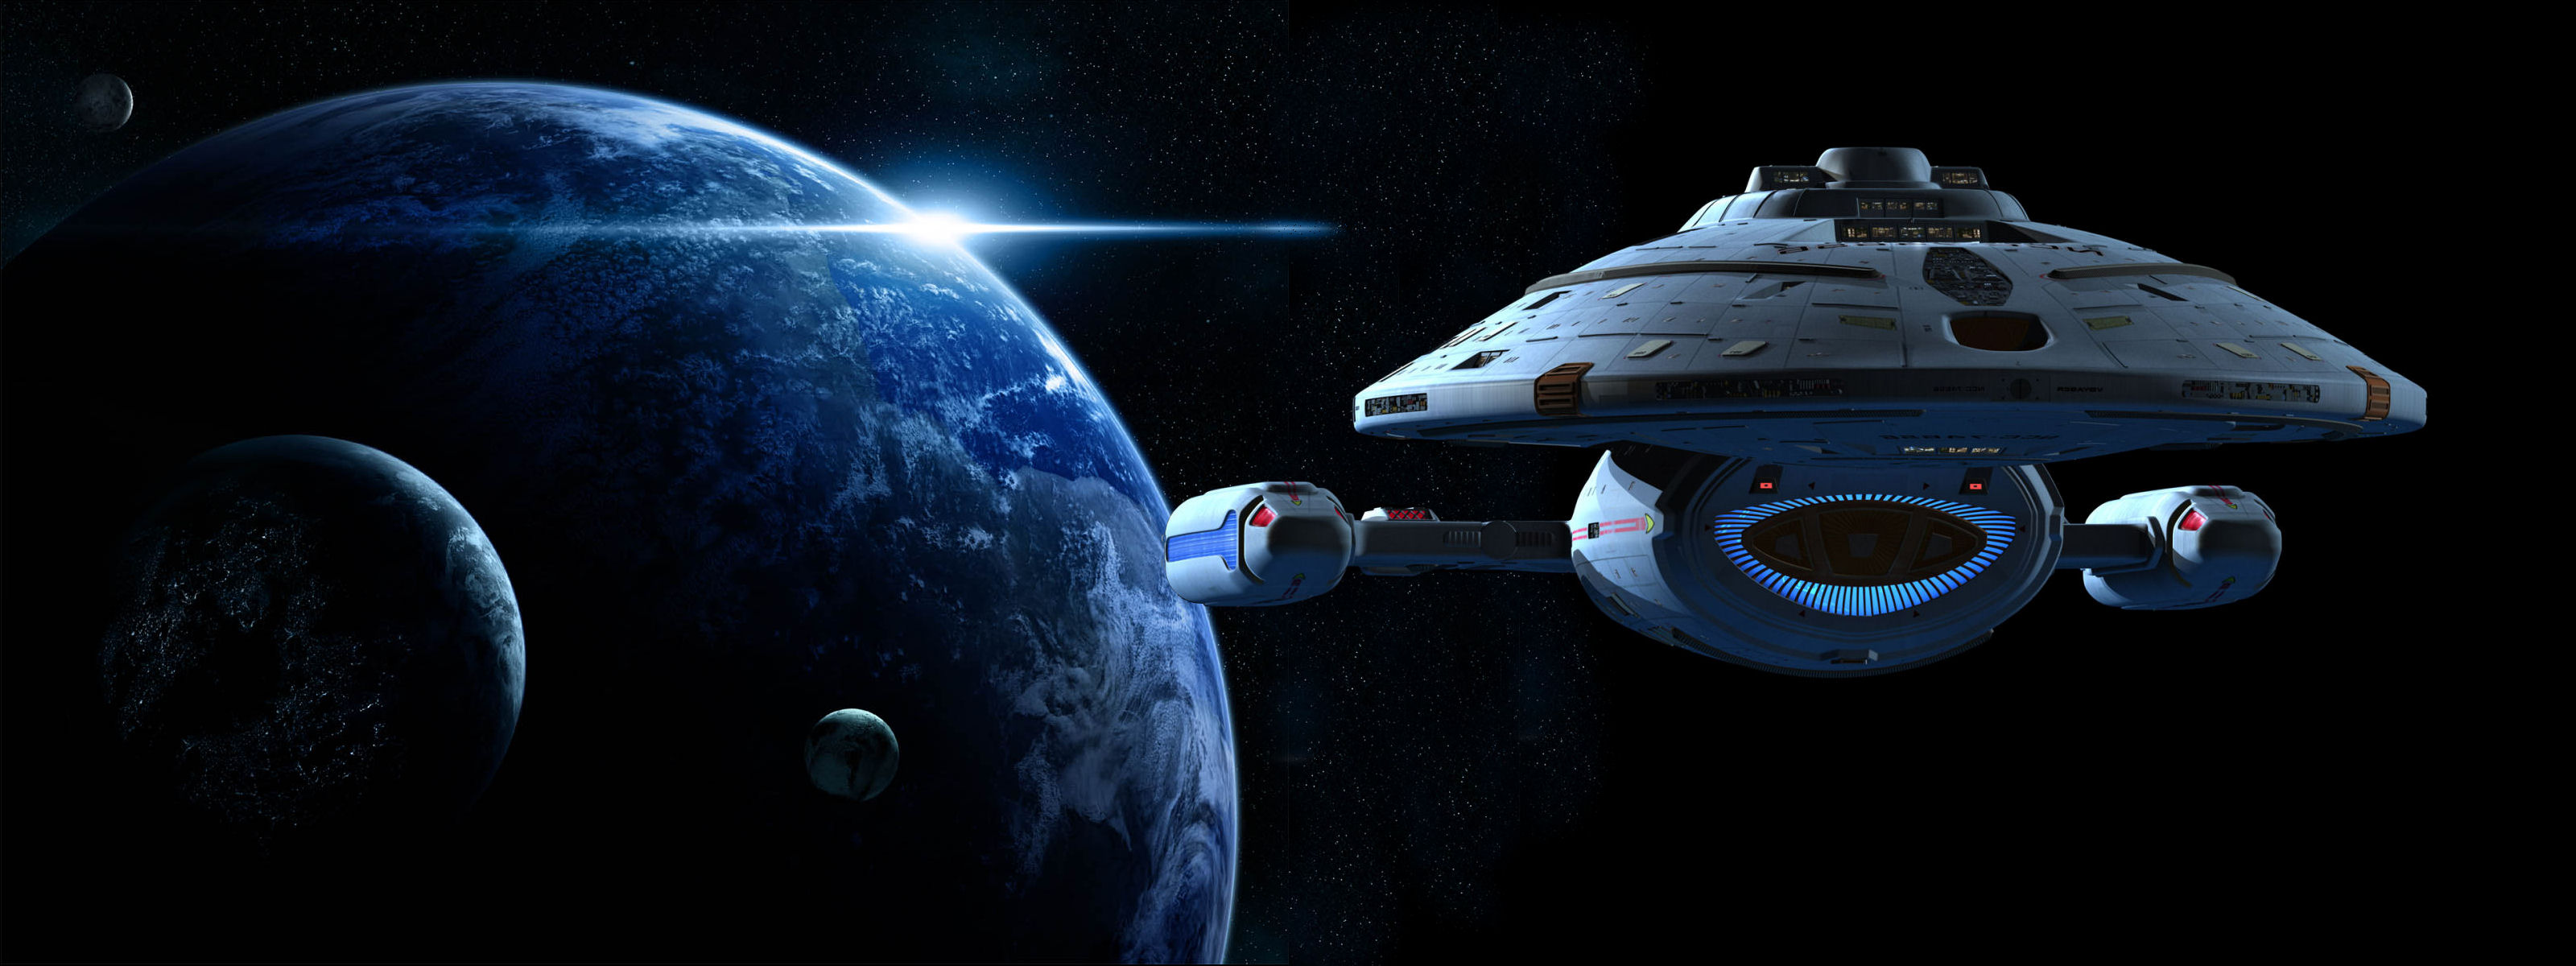 516124 star trek the next generation : Wallpaper Collection 1920x1080 -  Rare Gallery HD Wallpapers